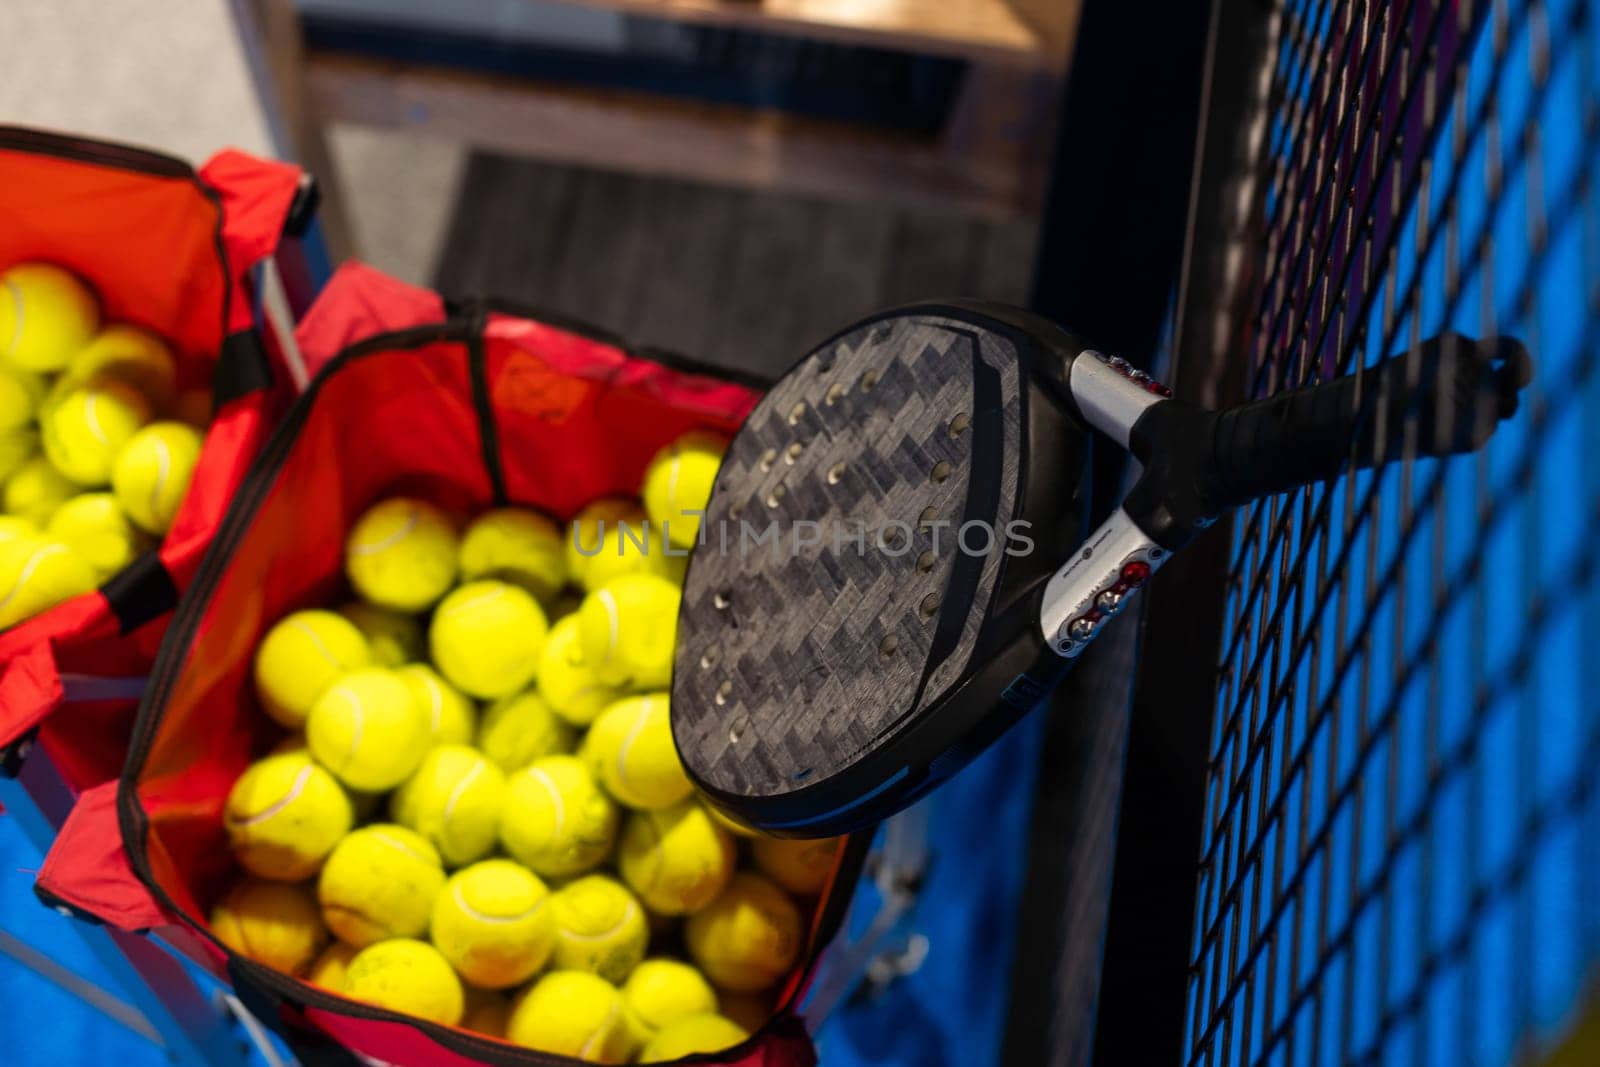 paddle tennis racket and balls on court, by Andelov13